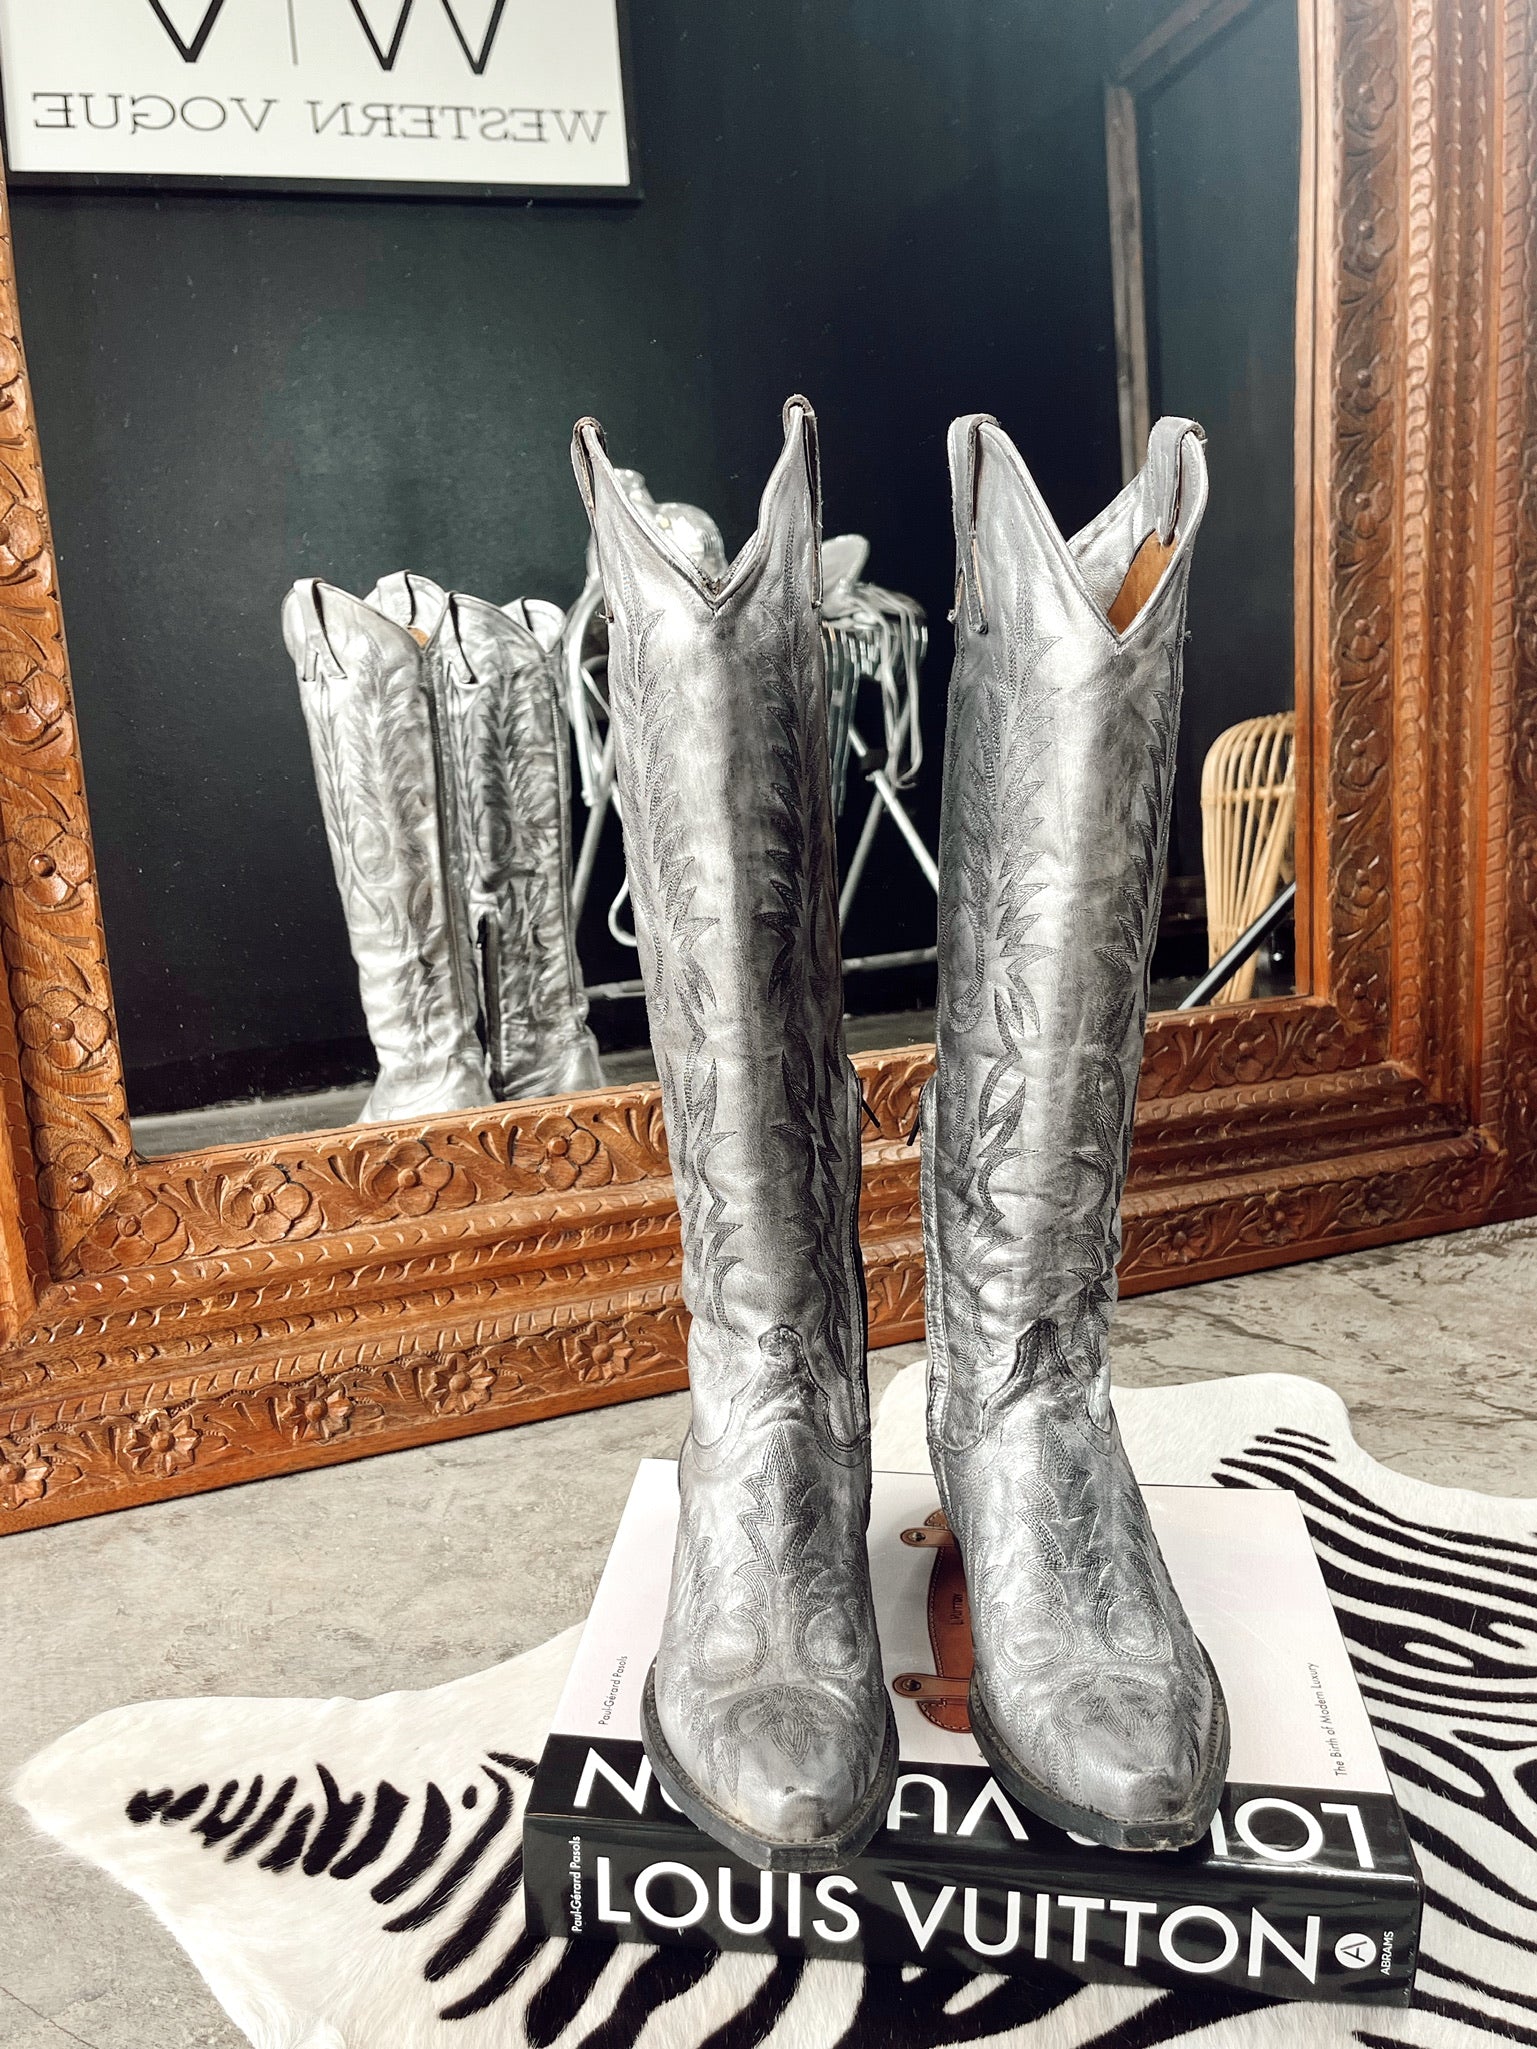 Old Gringo Mayra Ver Boots in Silver